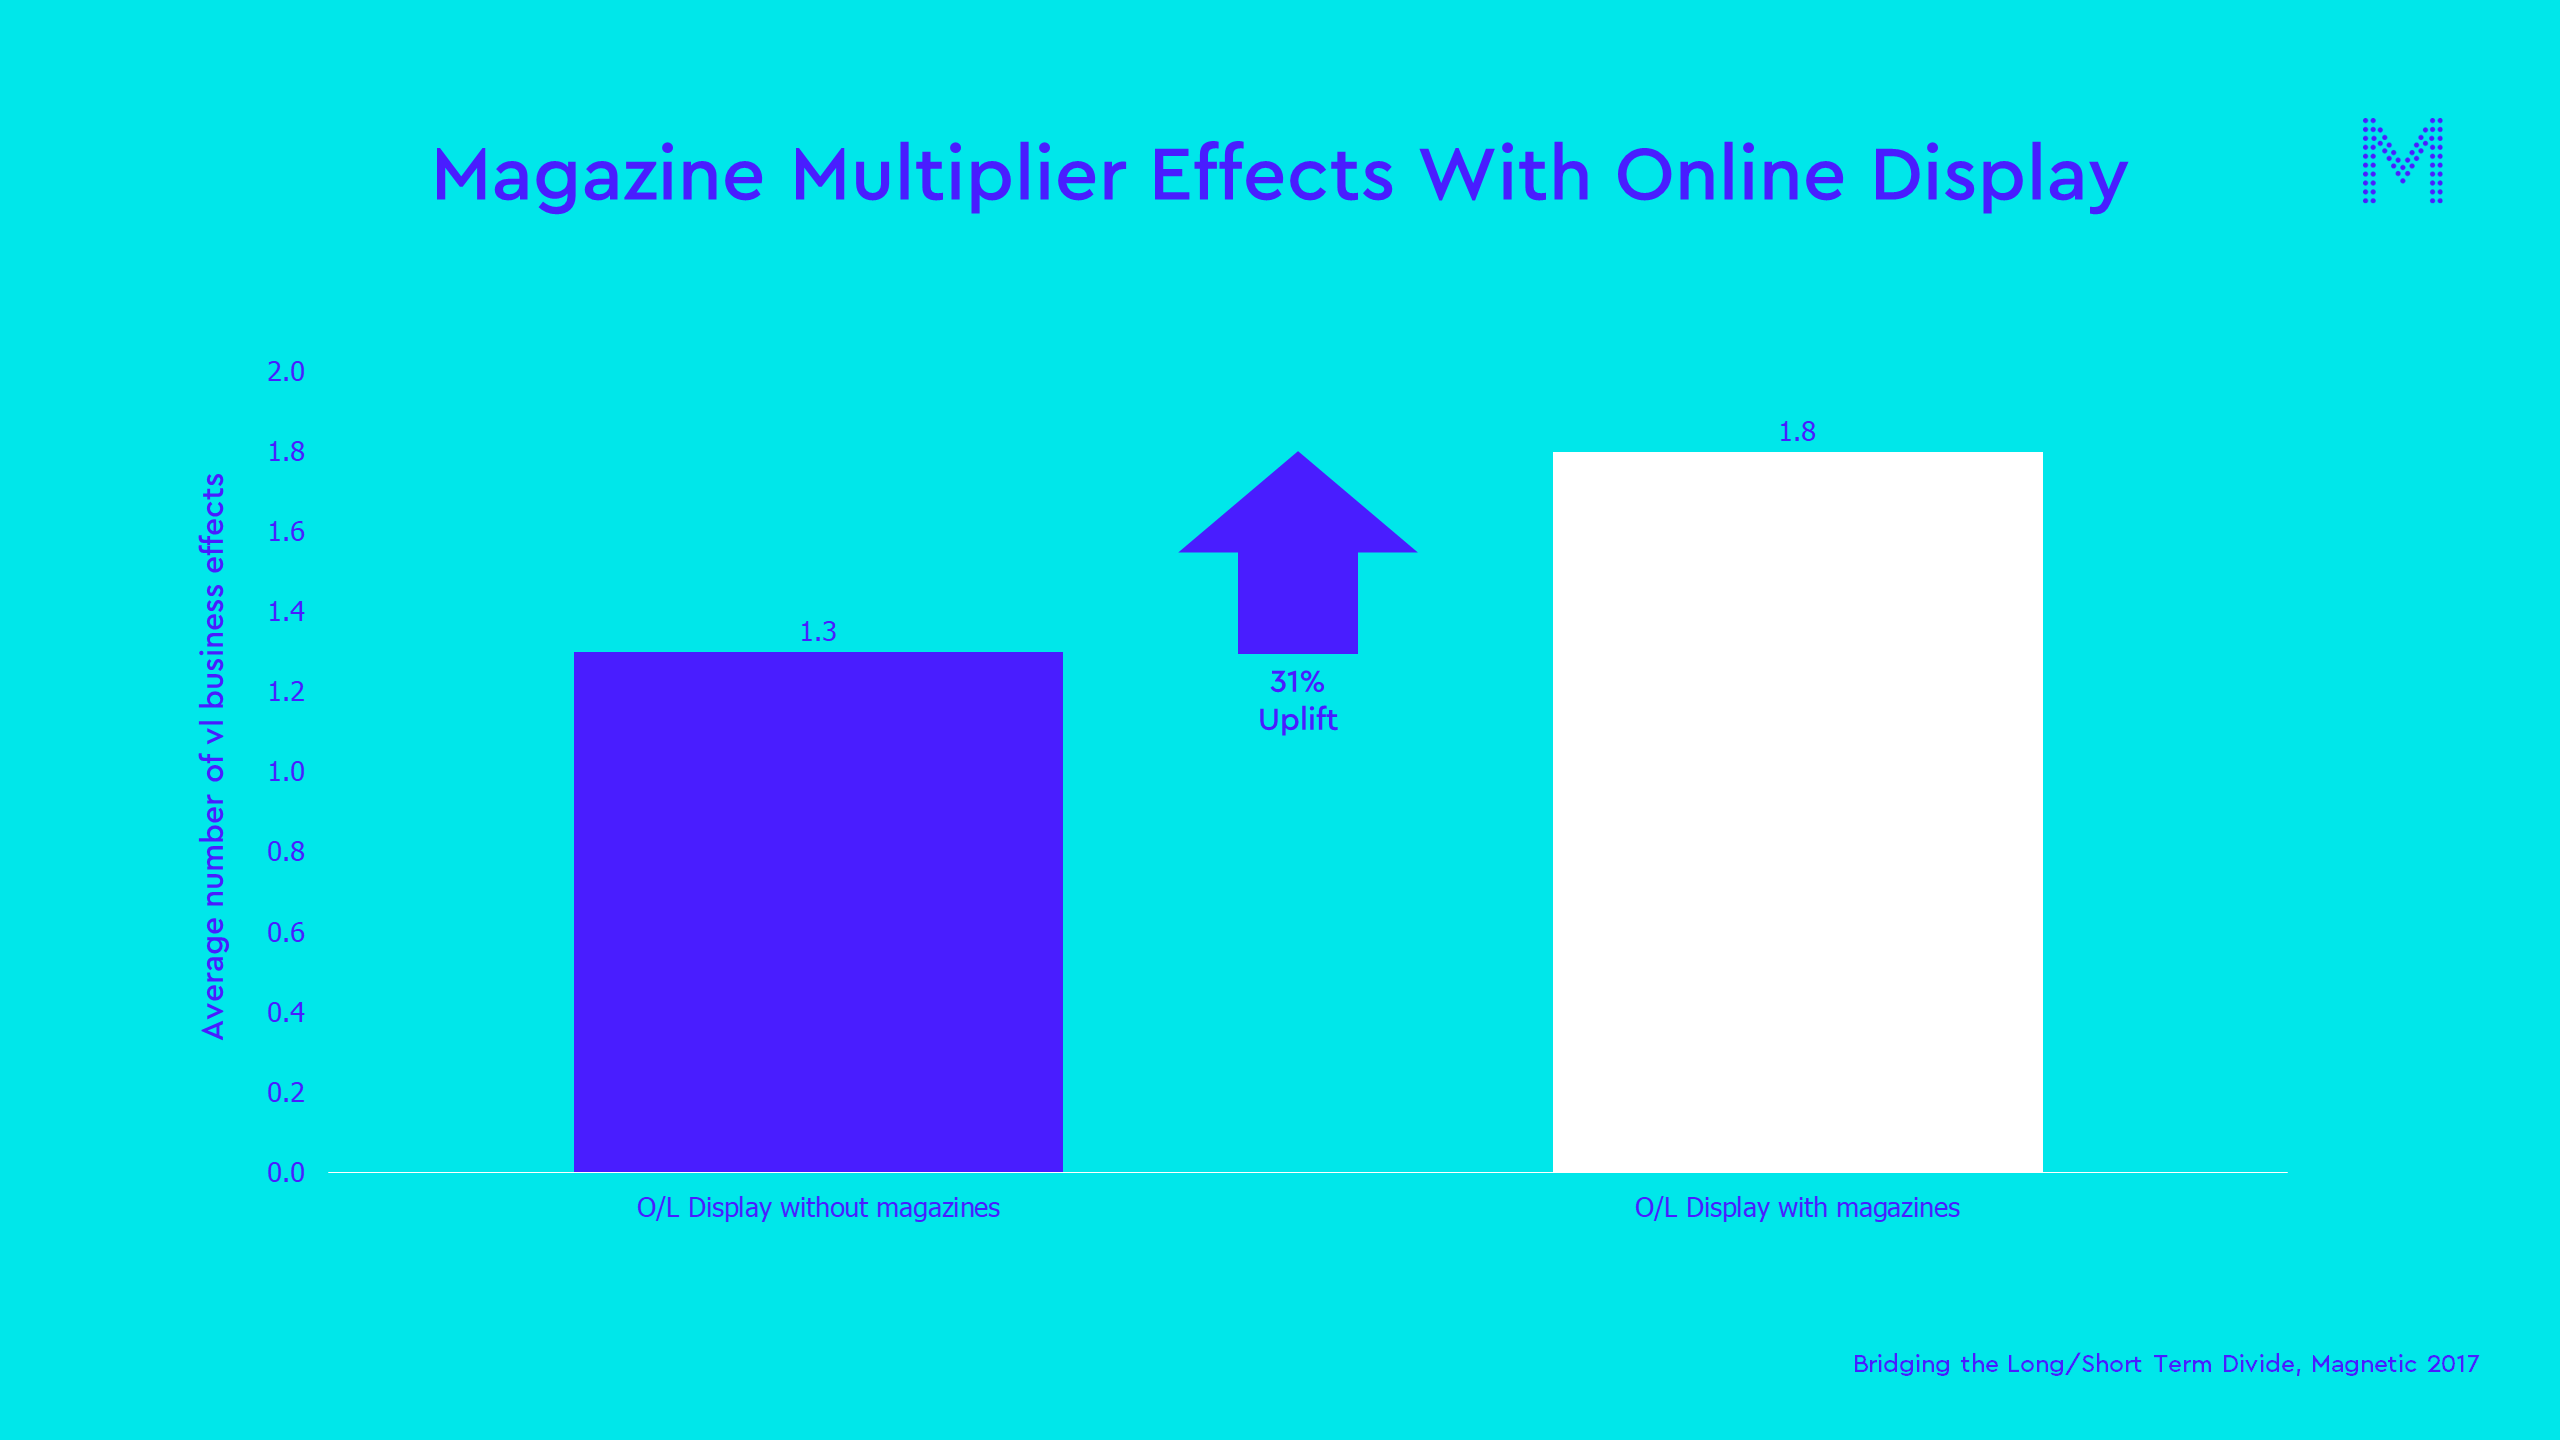 Magazine Multiplier Effects With Online Display